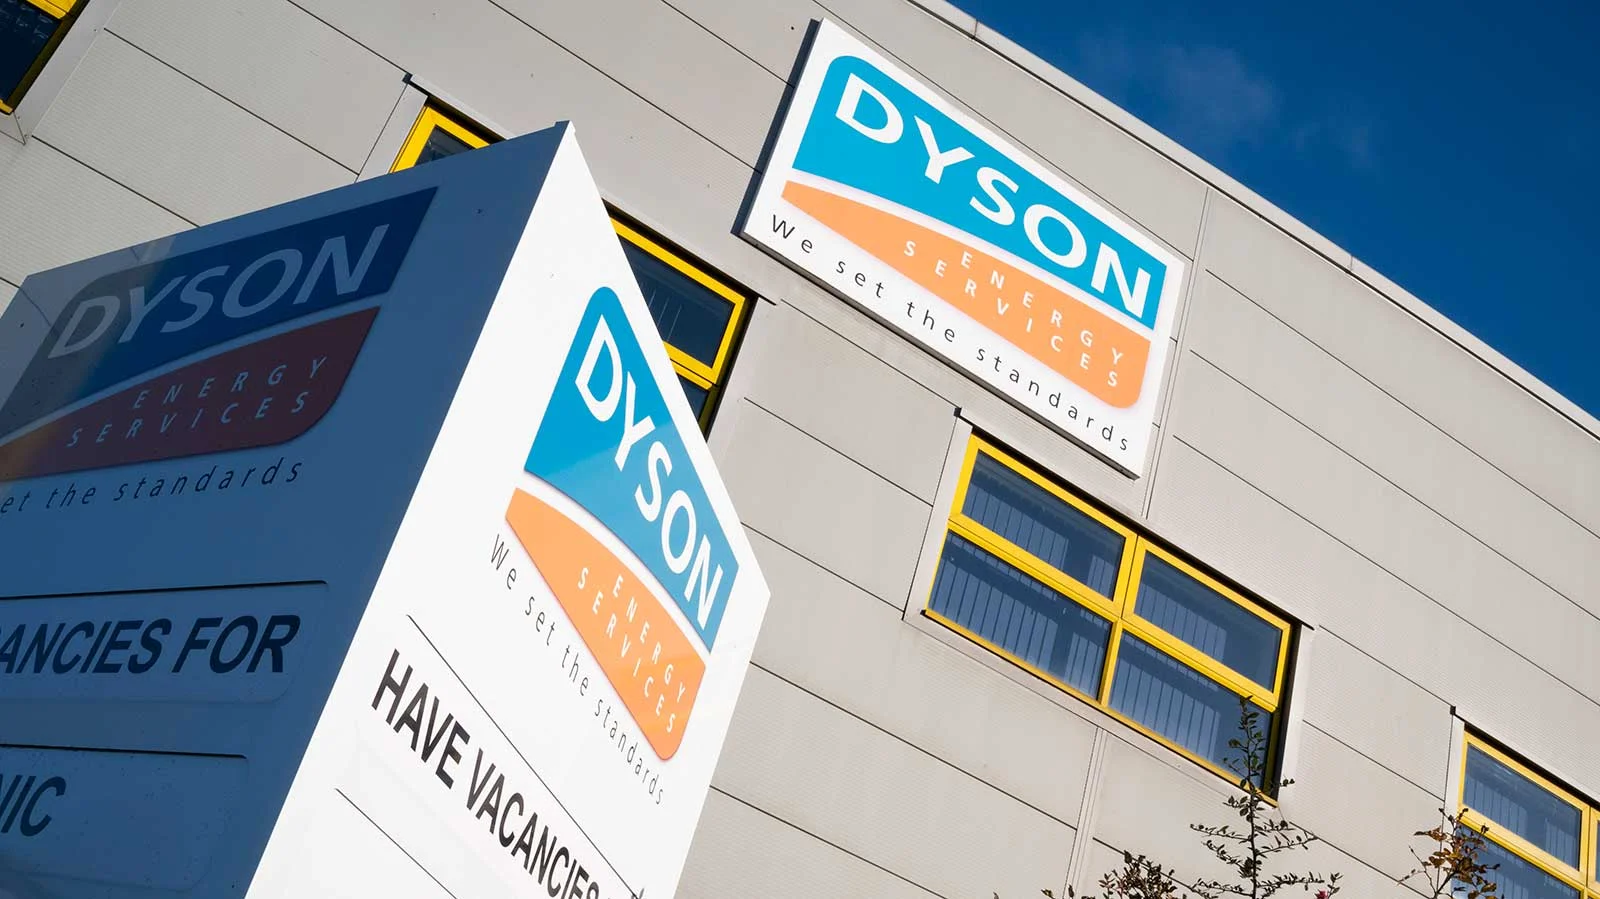 Dyson Energy Services - Setting the standards energy efficiency